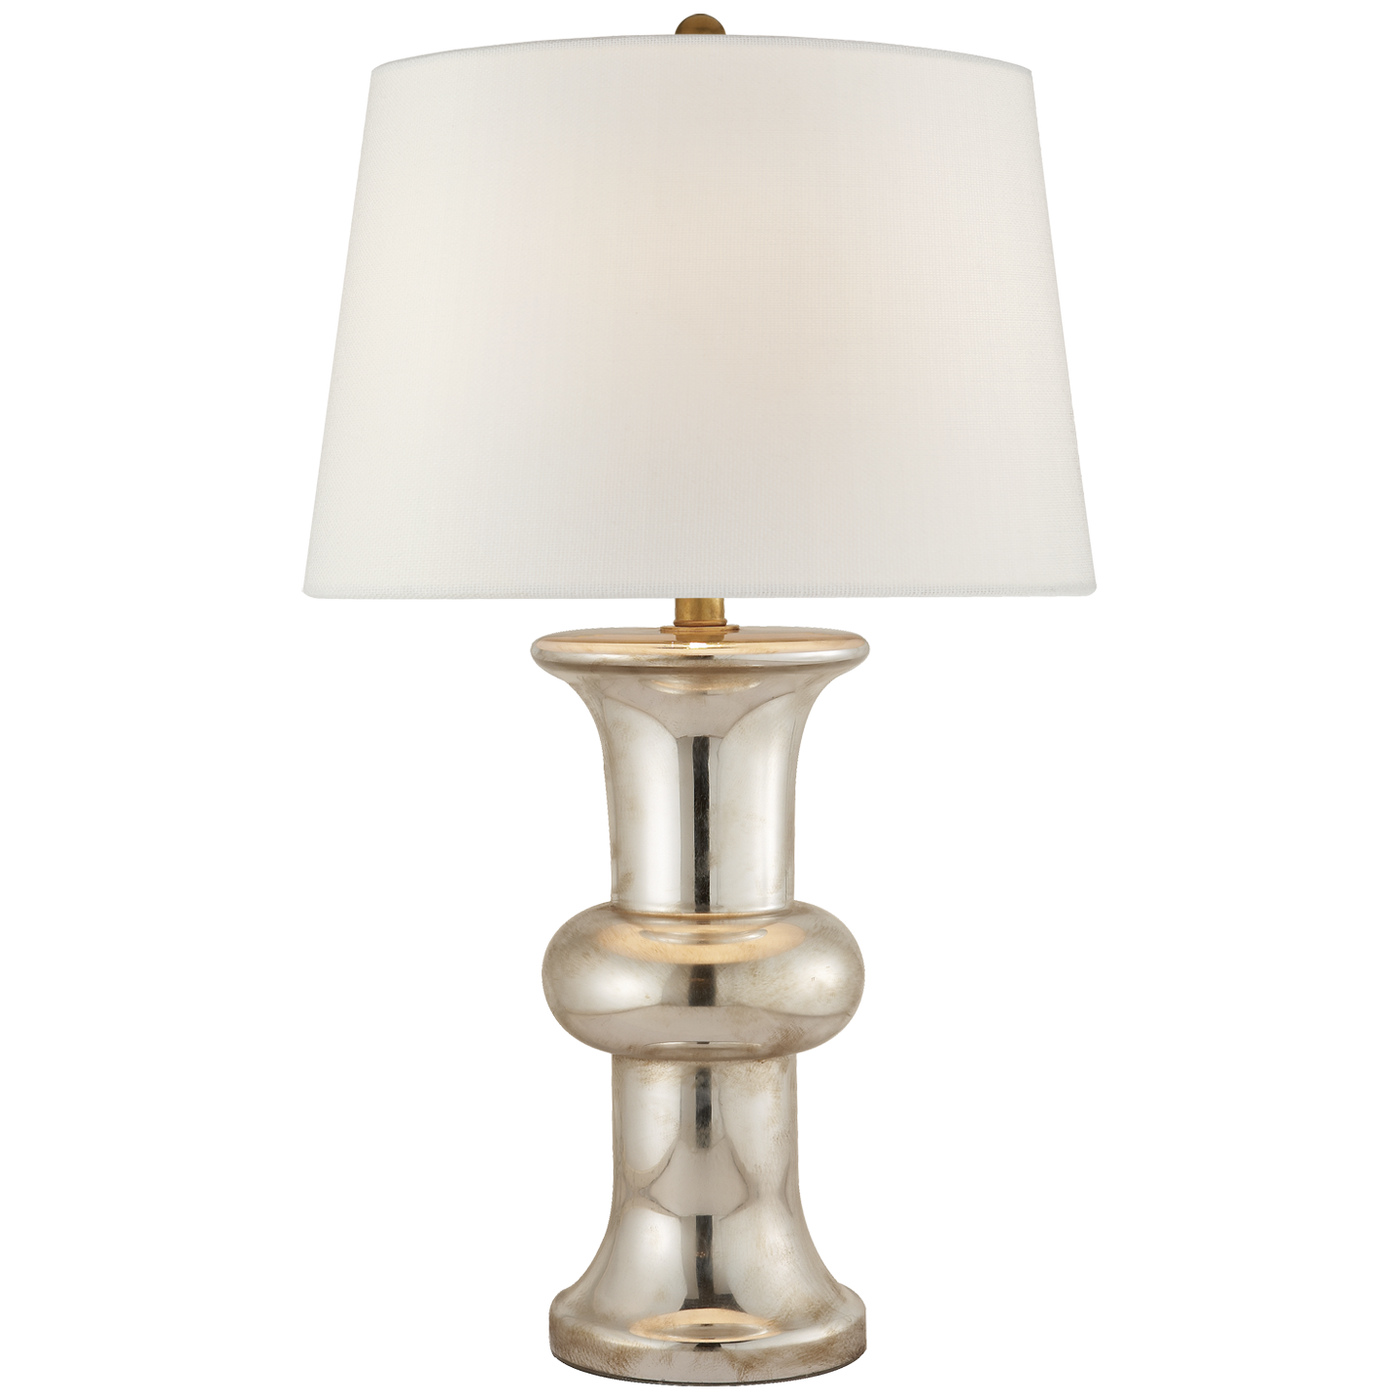 TABLE LAMP BULL NOSE CYLINDER MERCURY GLASS WITH LINEN SHADE